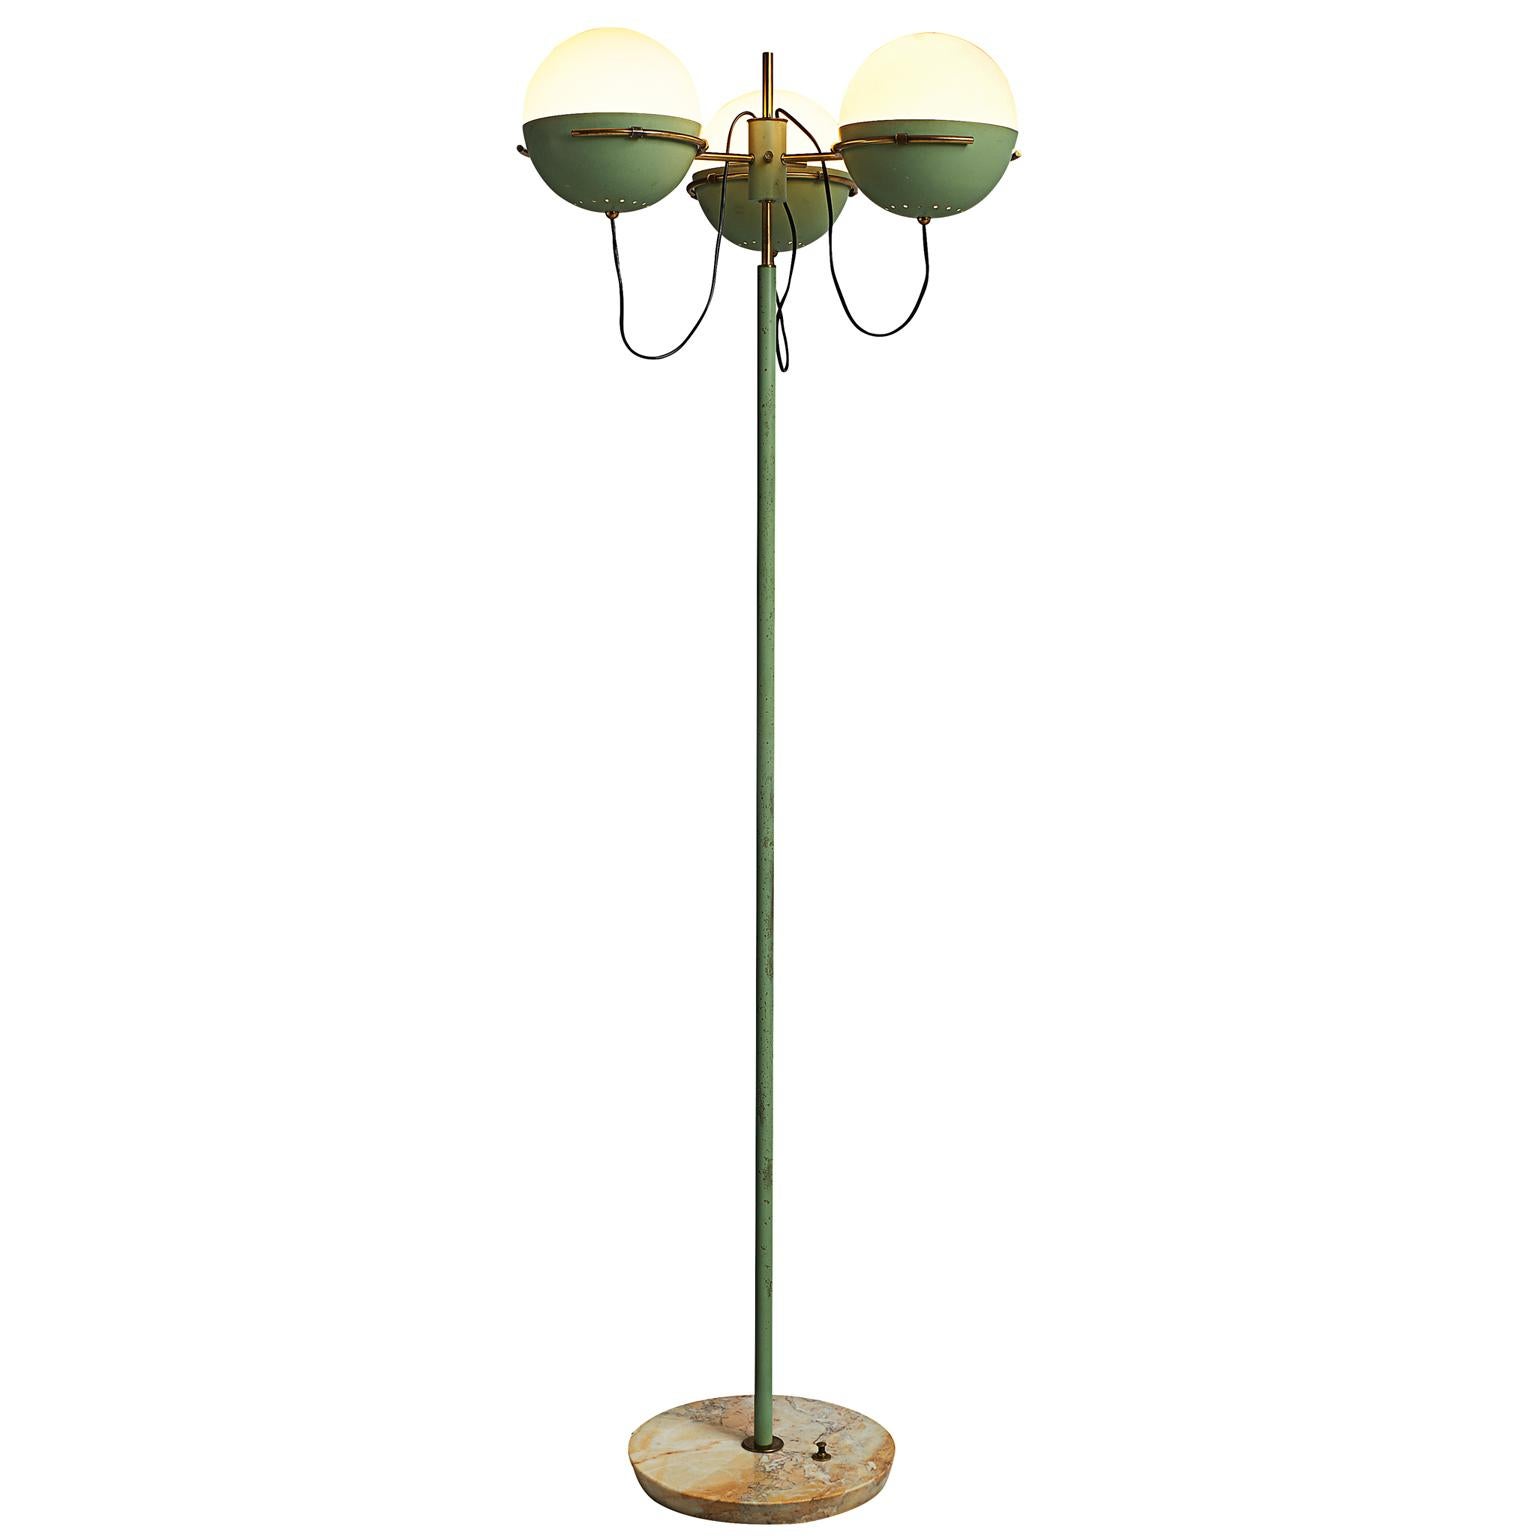 Italian Floor Lamp in Marble and Brass